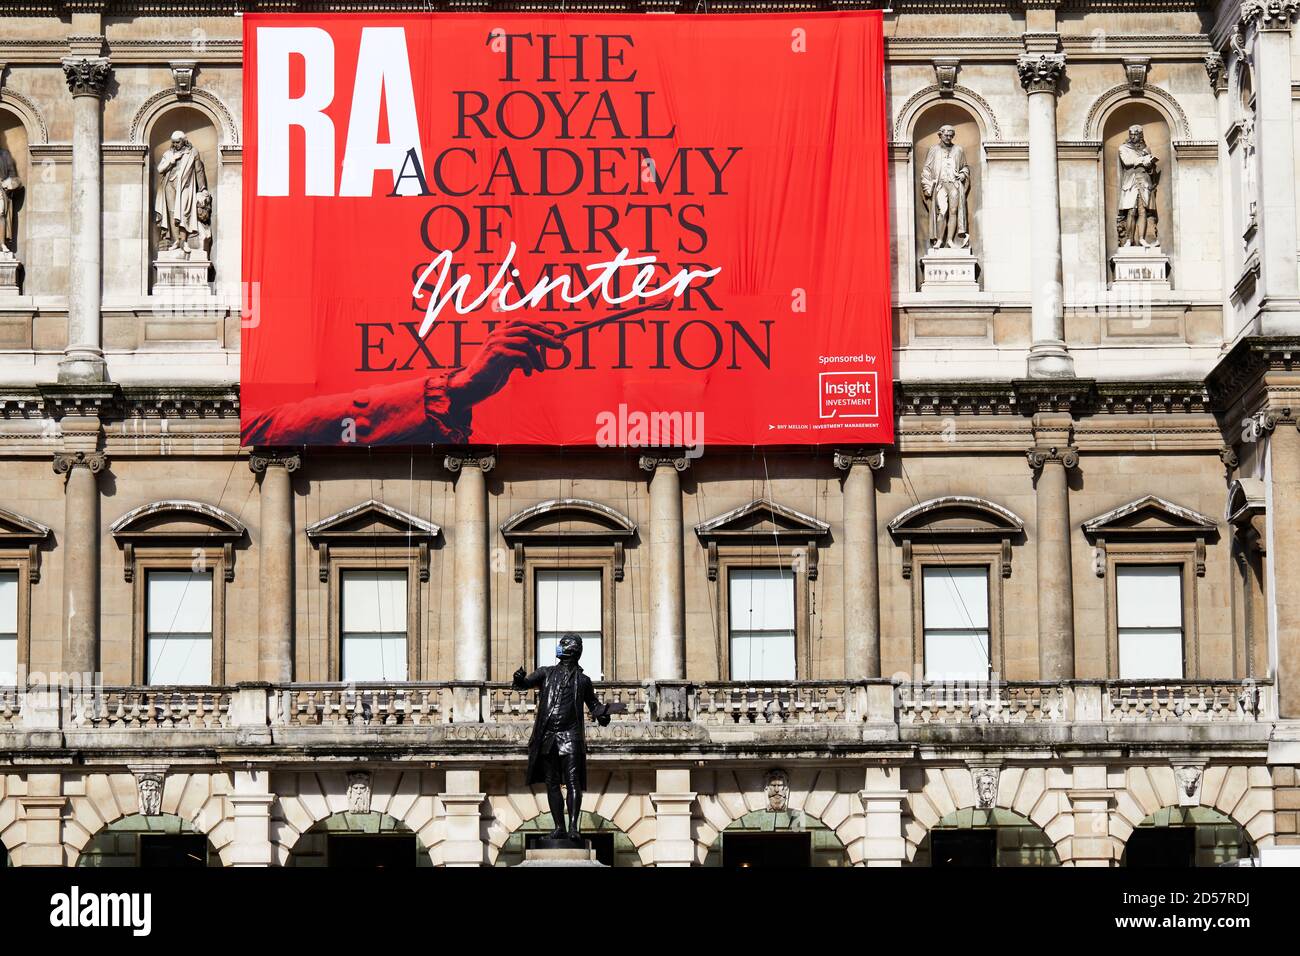 London, UK. - 5 Oct 2020: A masked statue in front of a banner advertising the traditional Royal Academy Summer Exhibition, delayed until October due to the coronavirus pandemic. Stock Photo